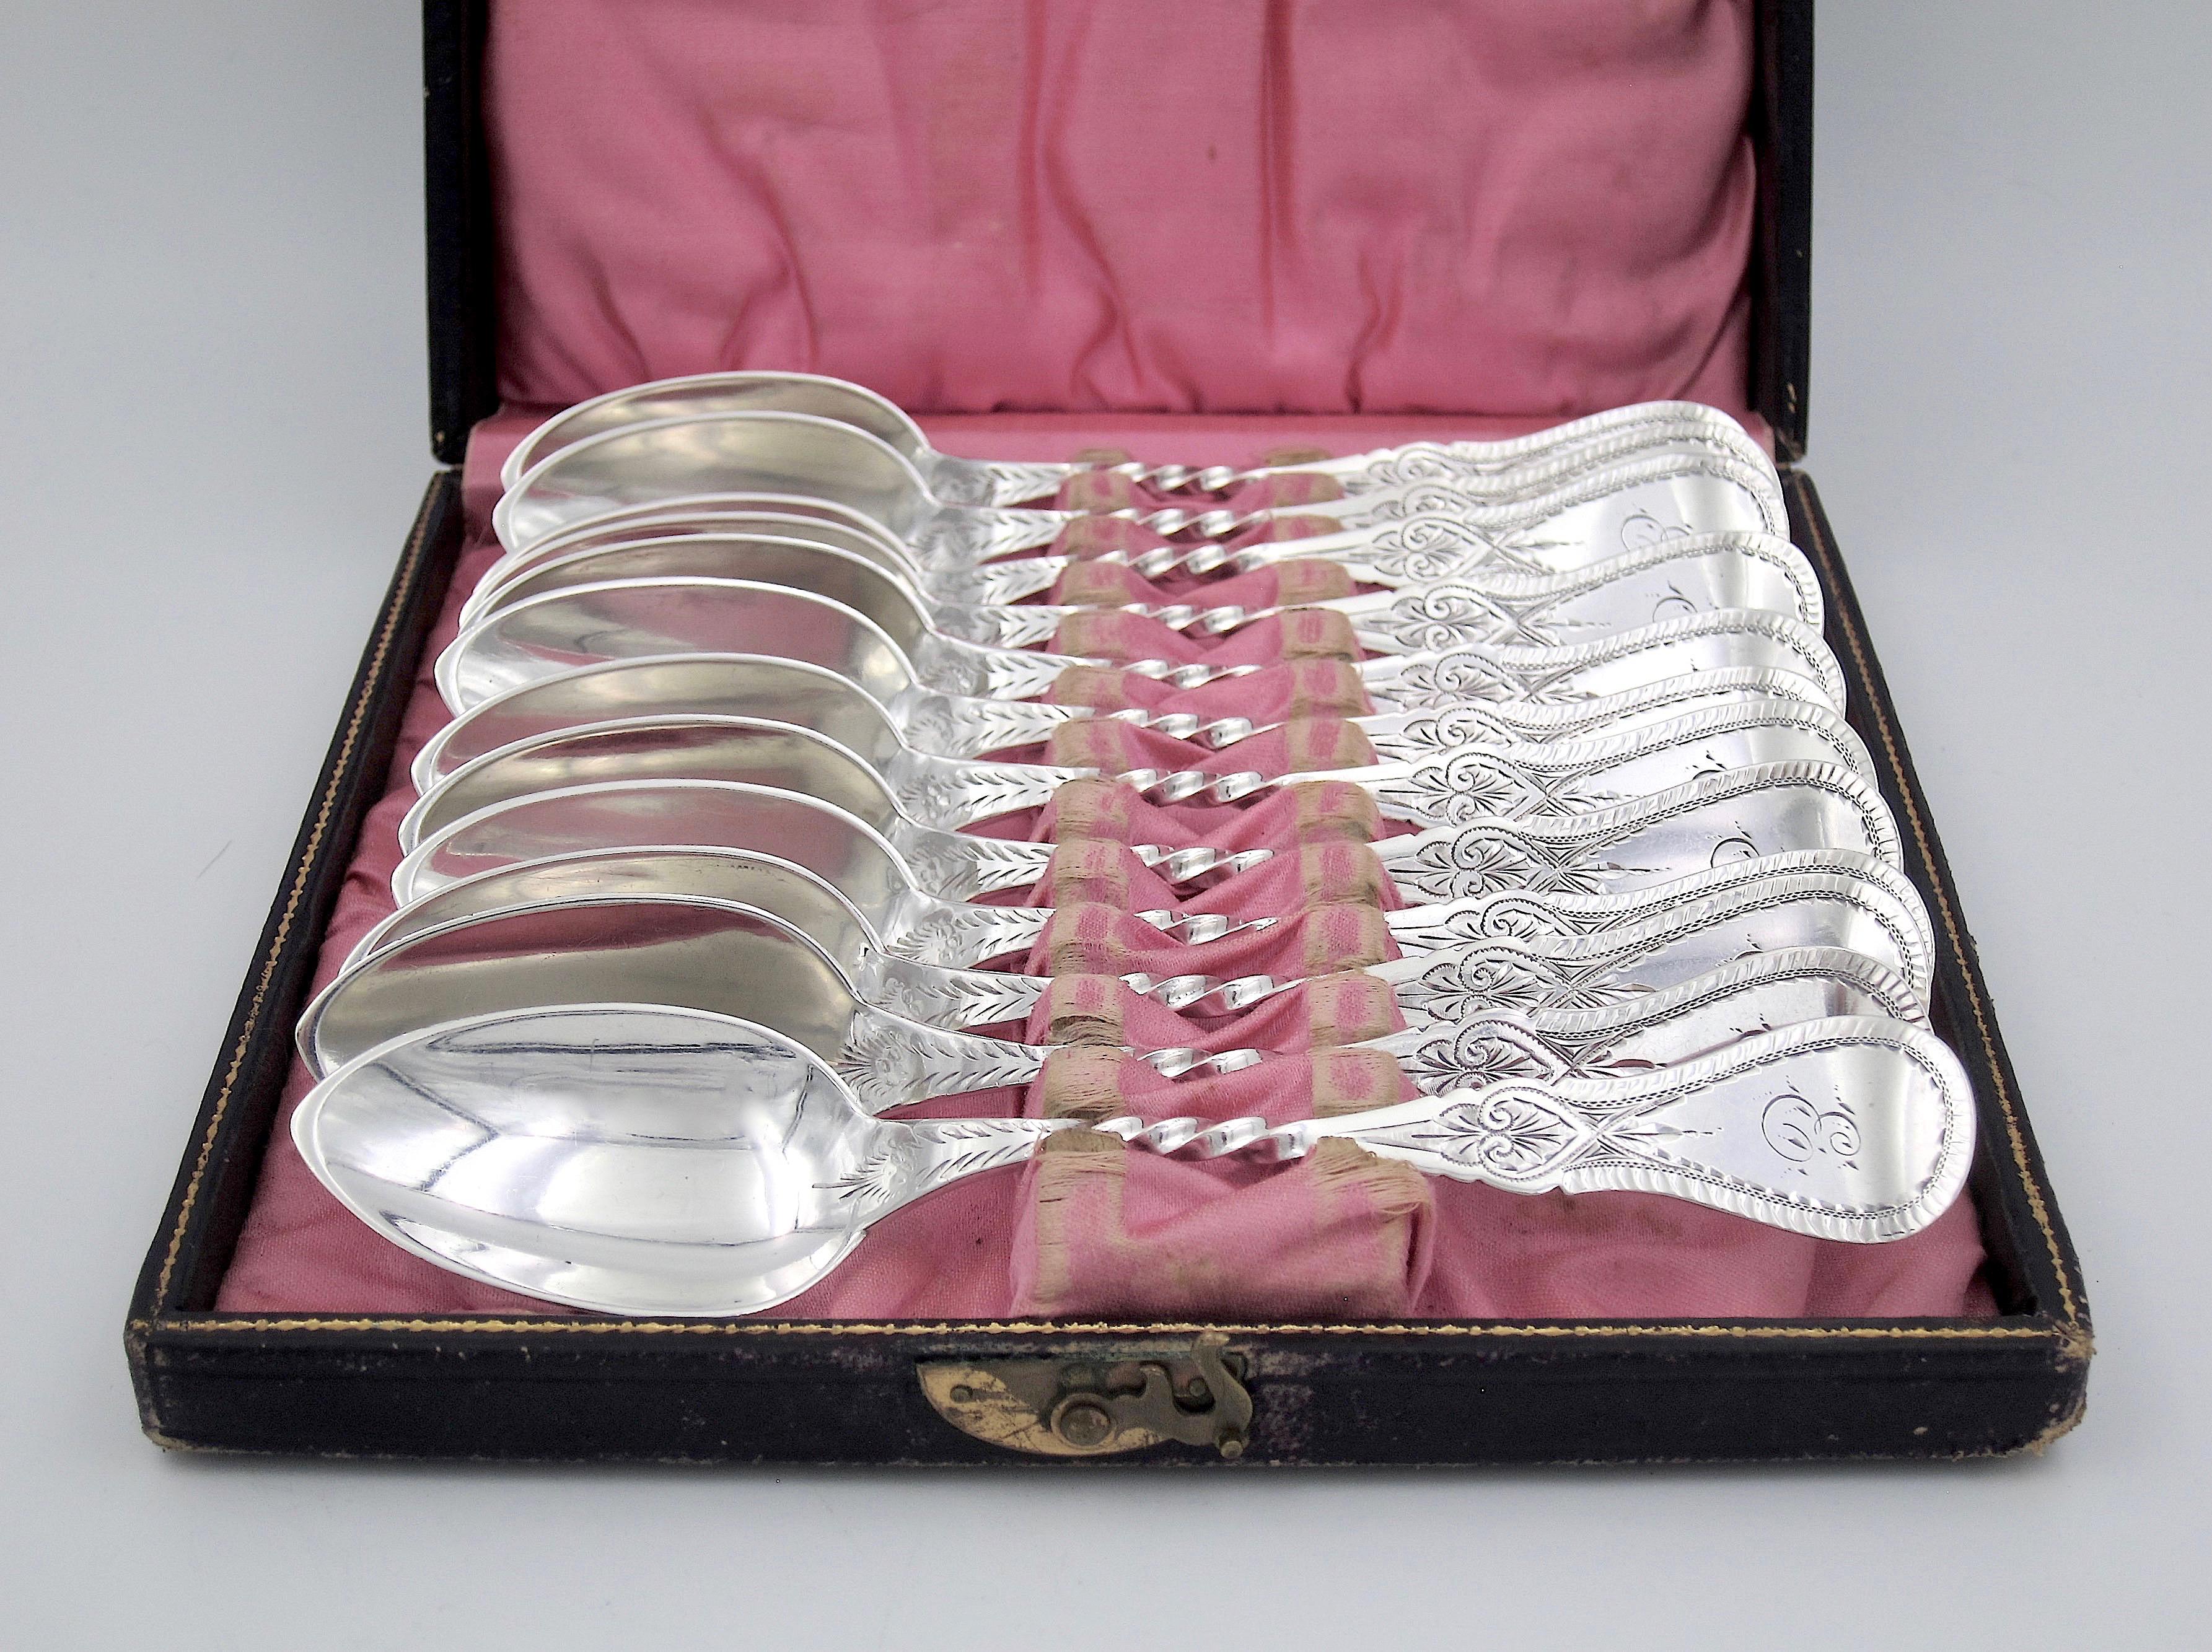 A boxed set of 12 antique coin silver spoons from Philadelphia silversmith James Watts (active 1835-1887). The intricately engraved American silver spoons date to the mid-19th century and remain in their original silk lined presentation box fitted